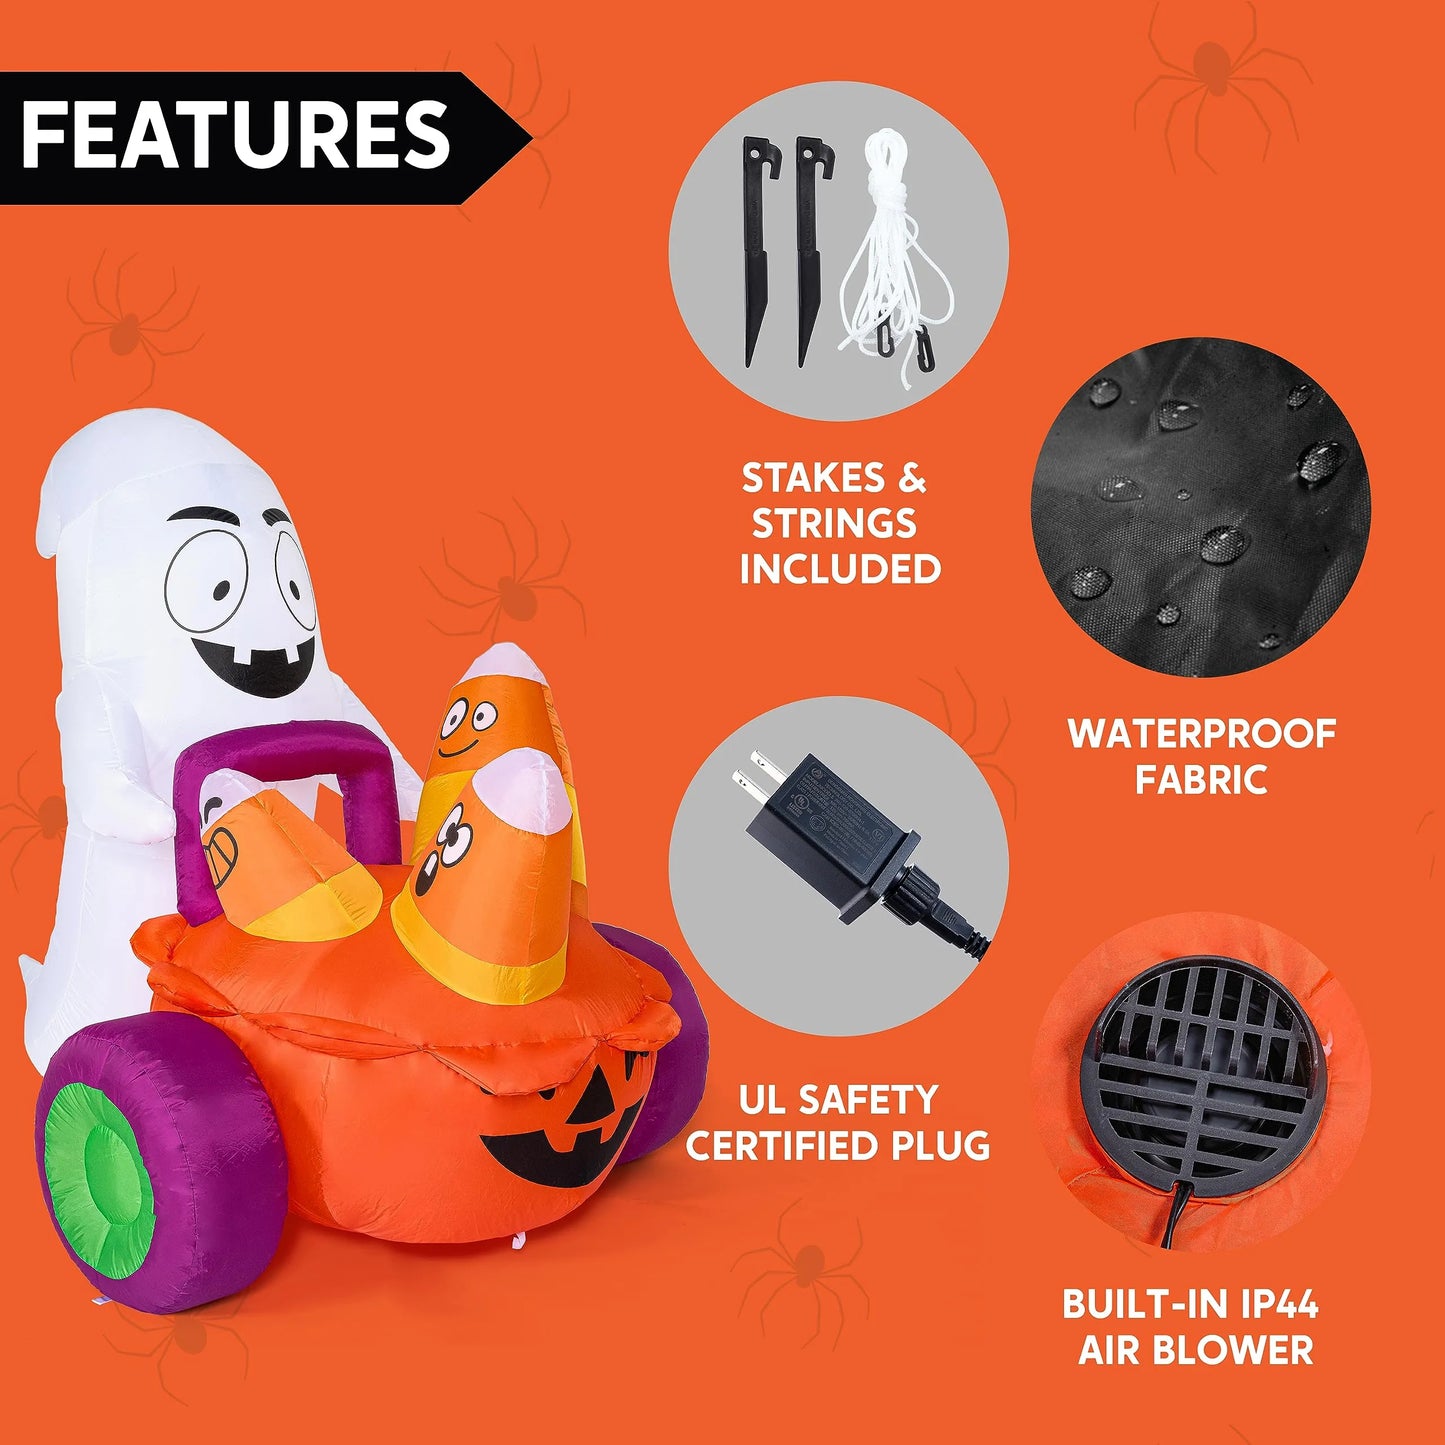 5ft Halloween Inflatable Ghost Pushing Pumpkin Carriage with Candy